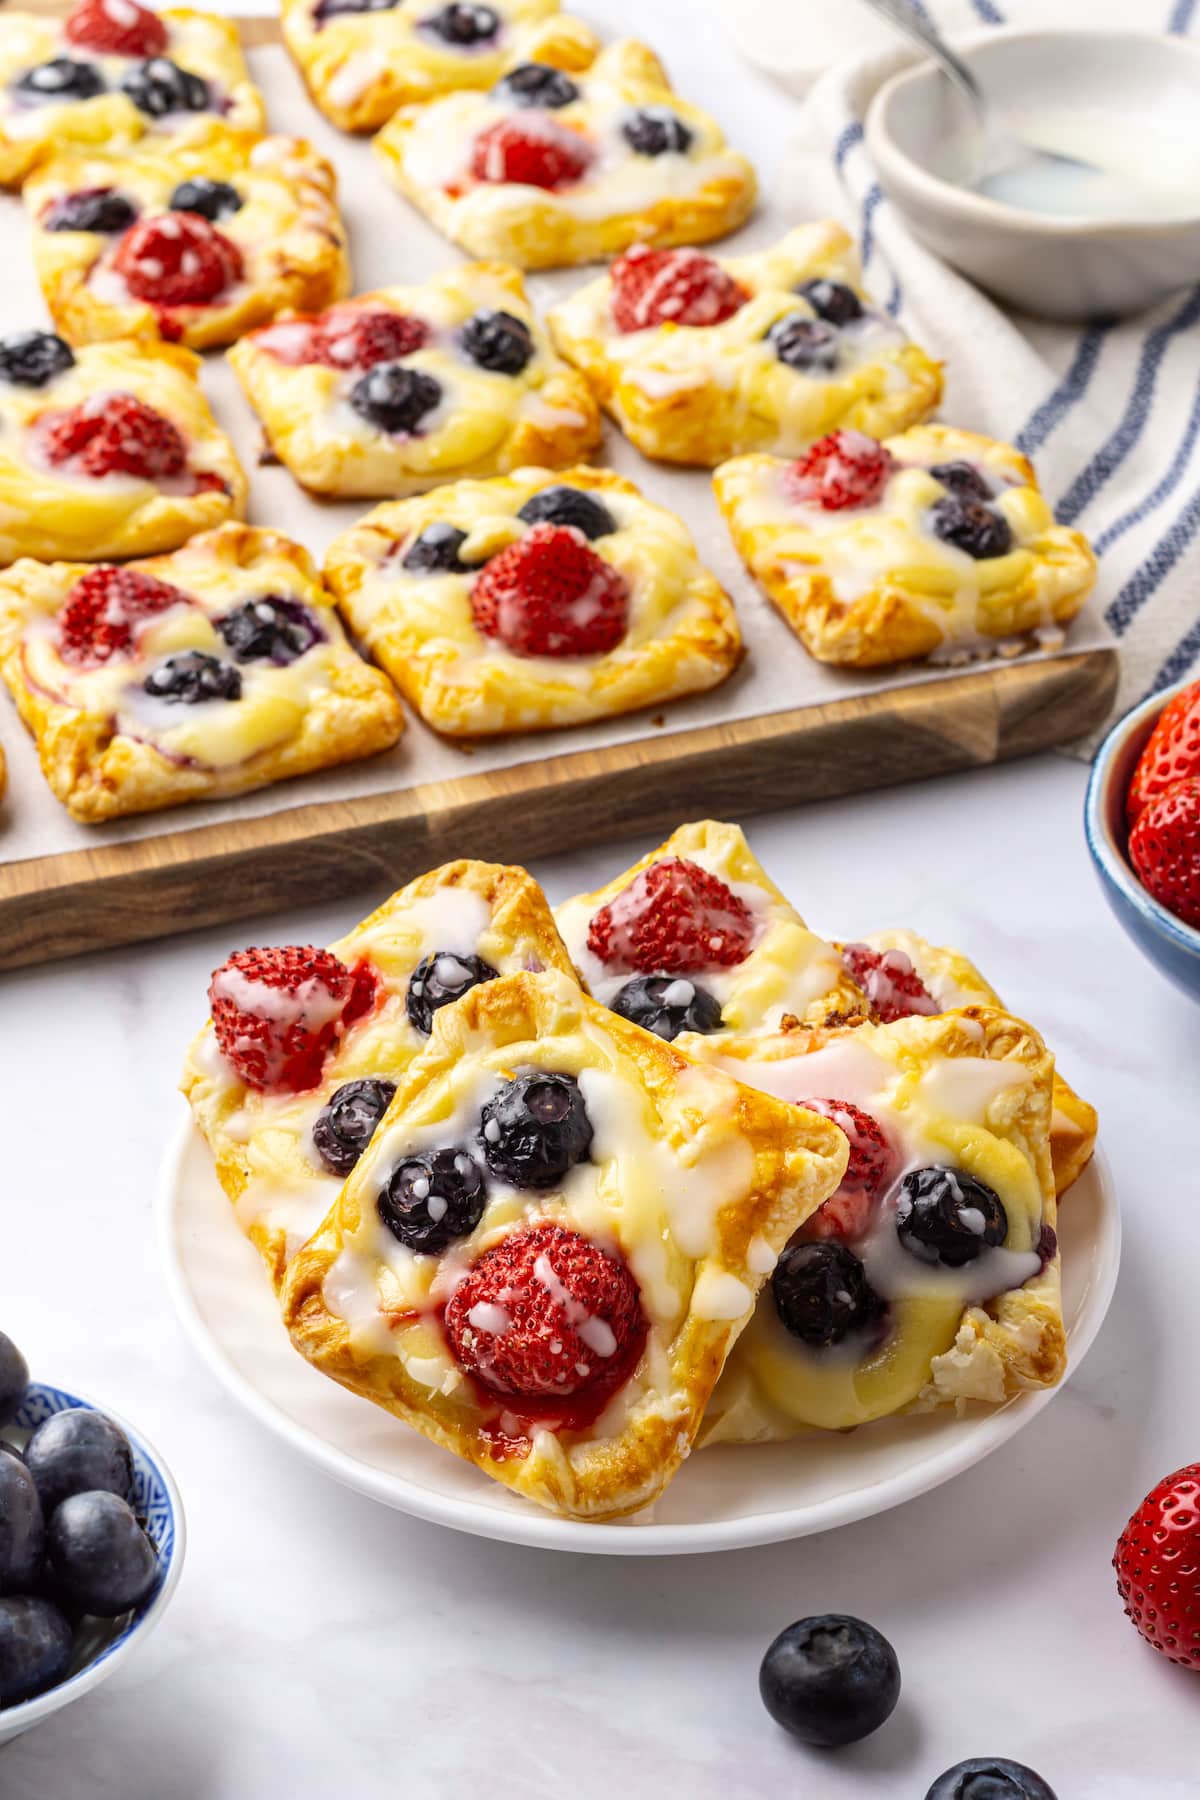 glazed cream cheese danishes with strawberries and blueberries on top lined up on a wood block in the background, as well as stacked on a white plate in the foreground.